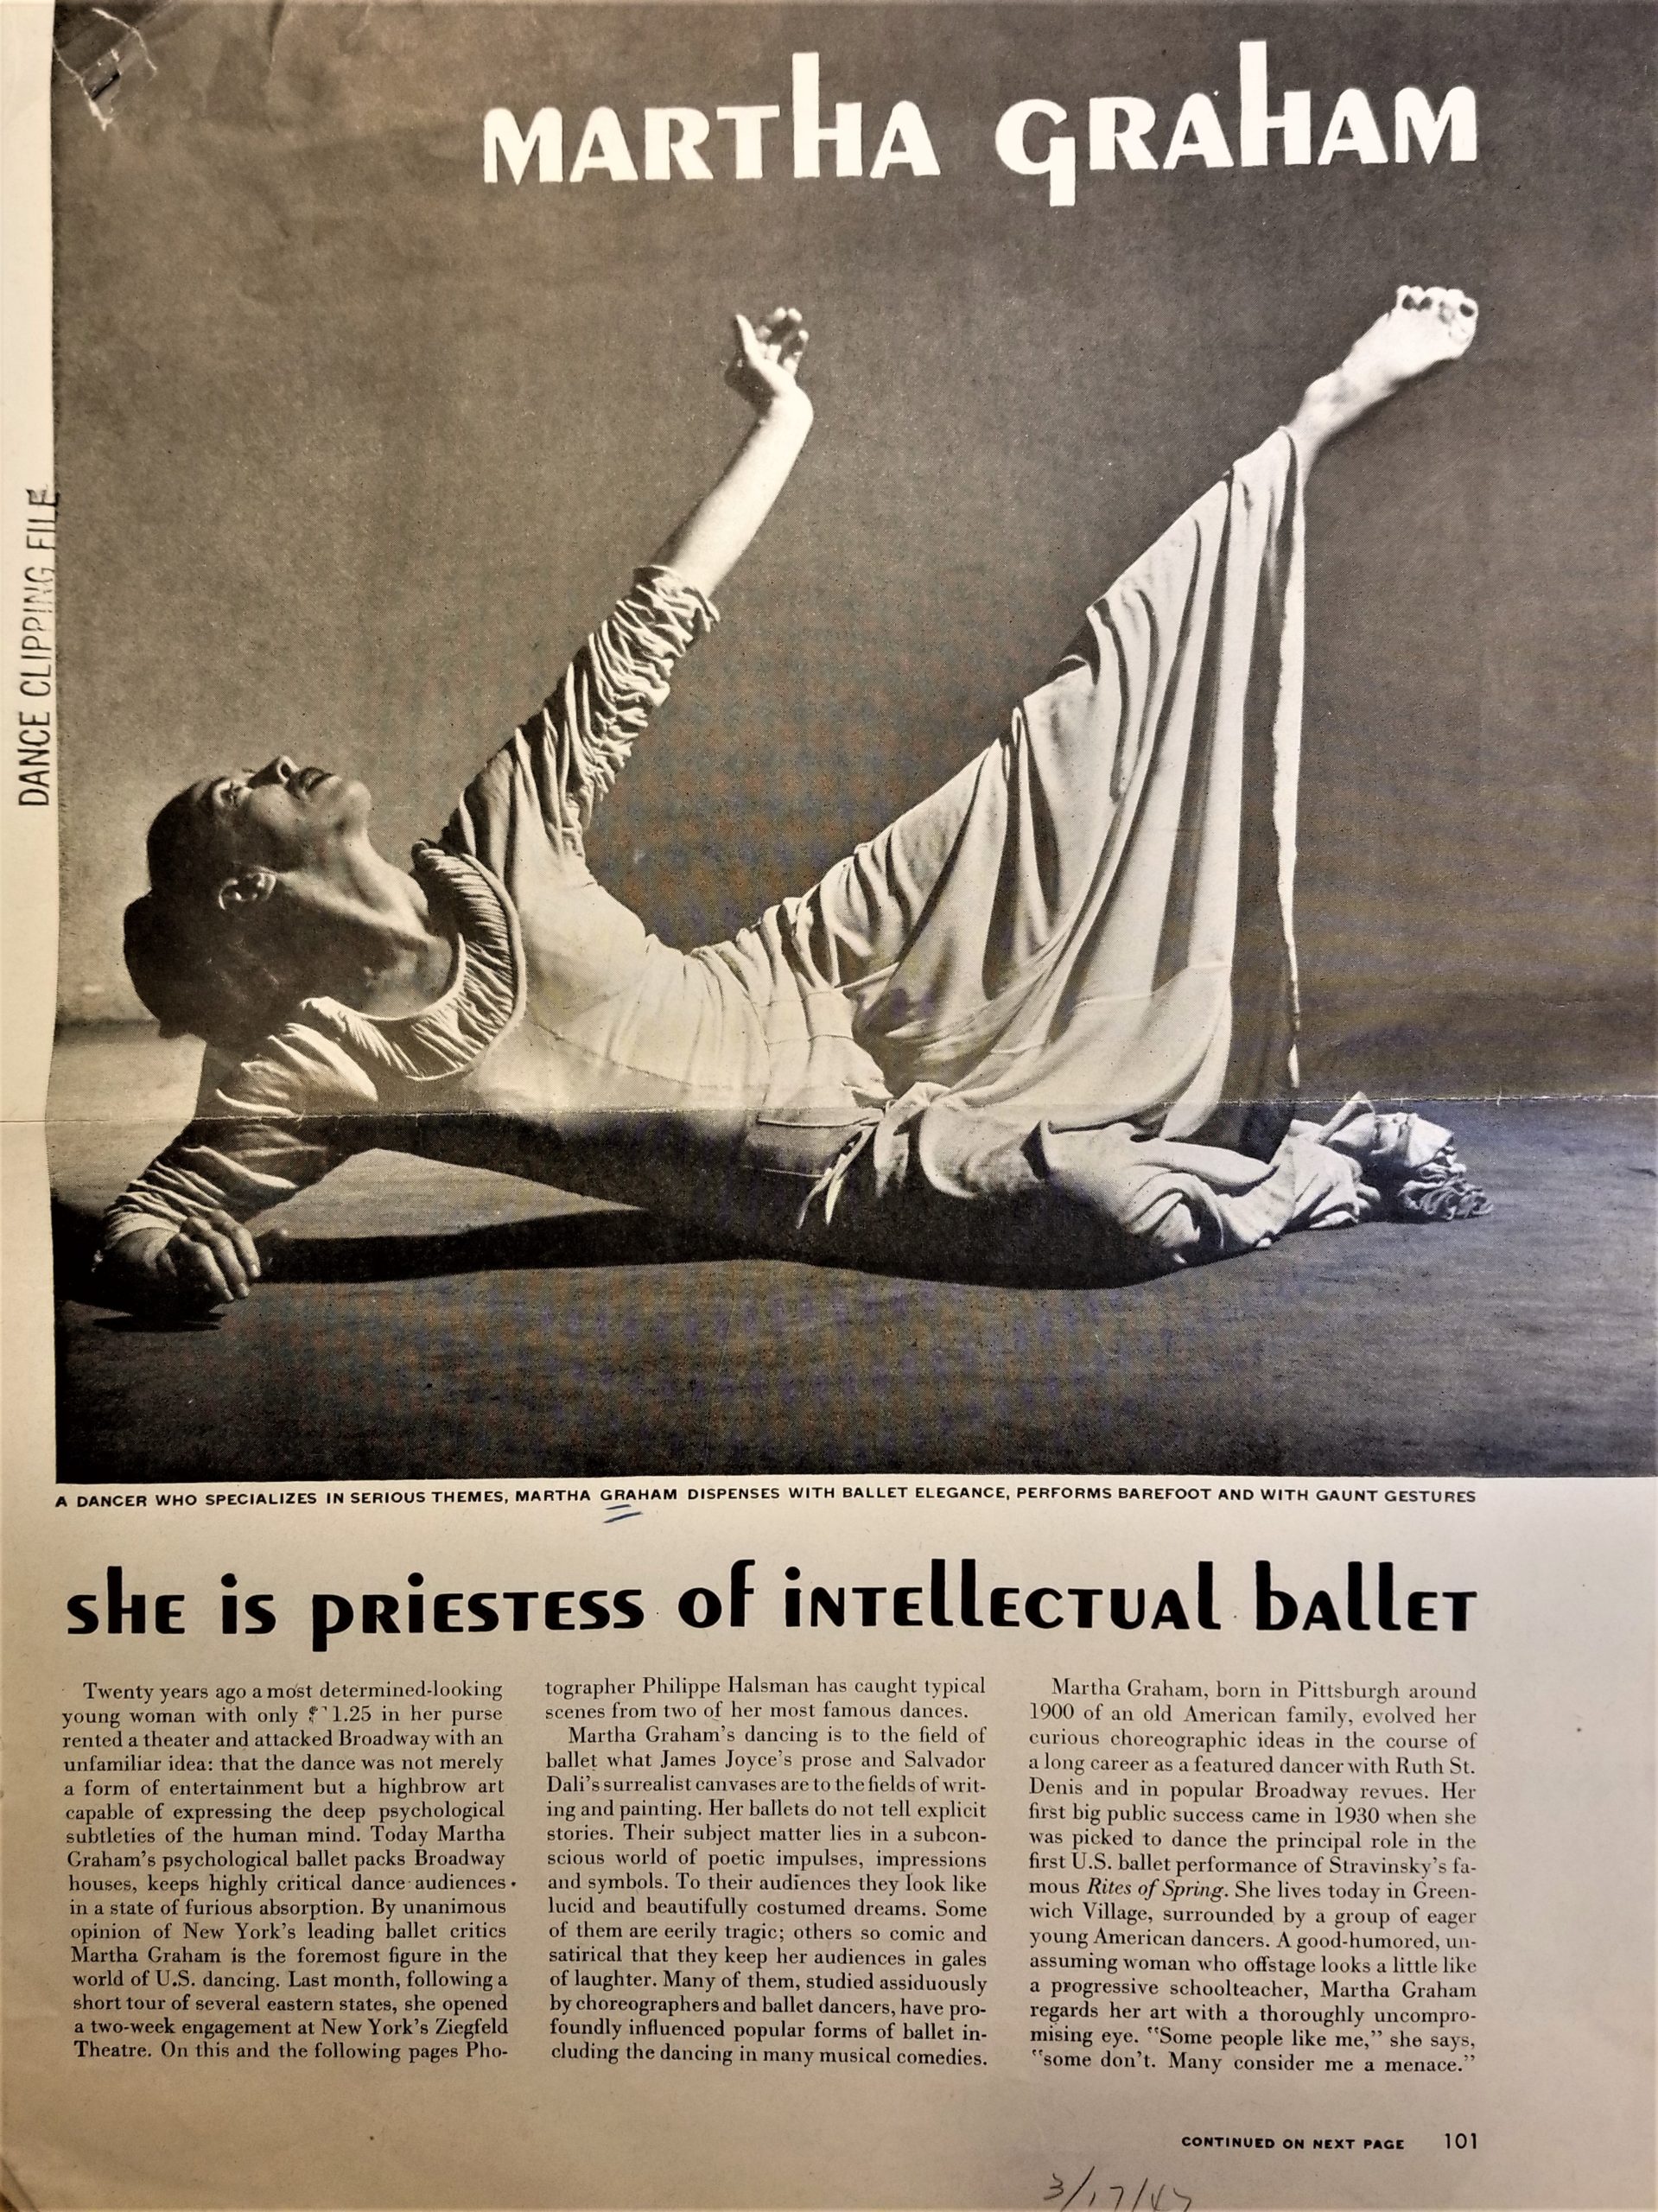 EVENTS – FOR NB’s MARTHA GRAHAM